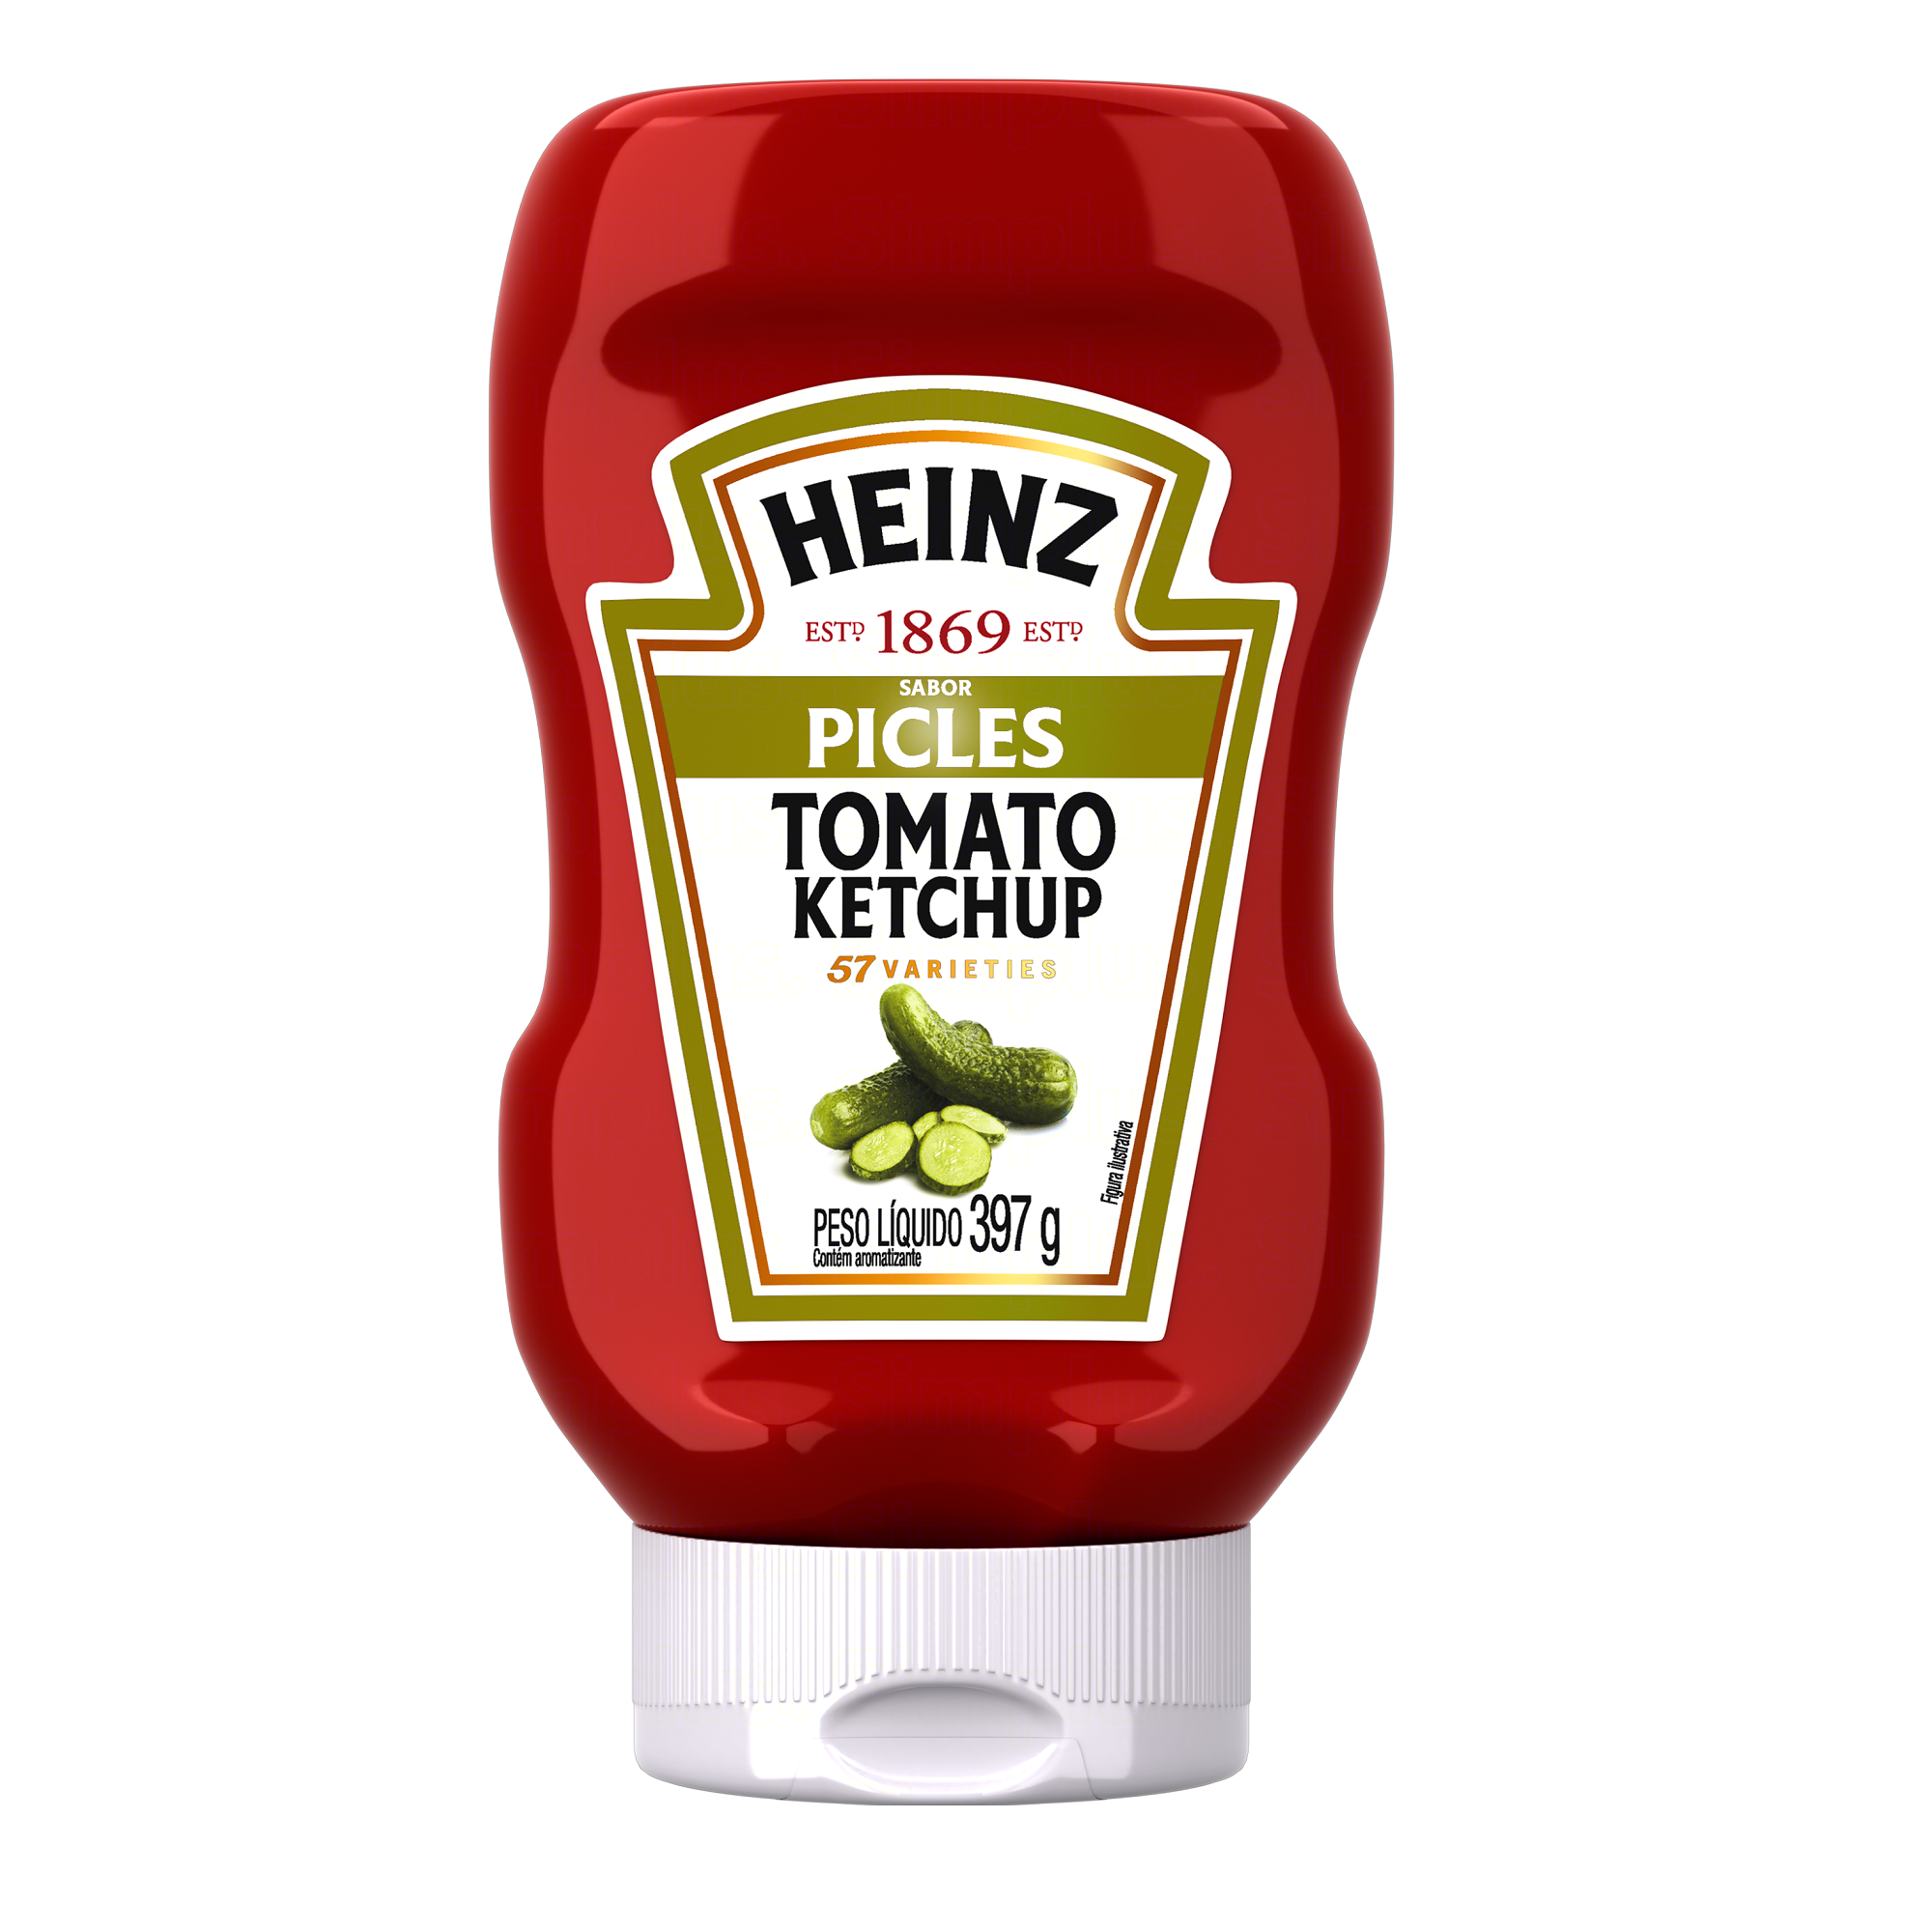 HEINZ TOMATO KETCHUP Picles